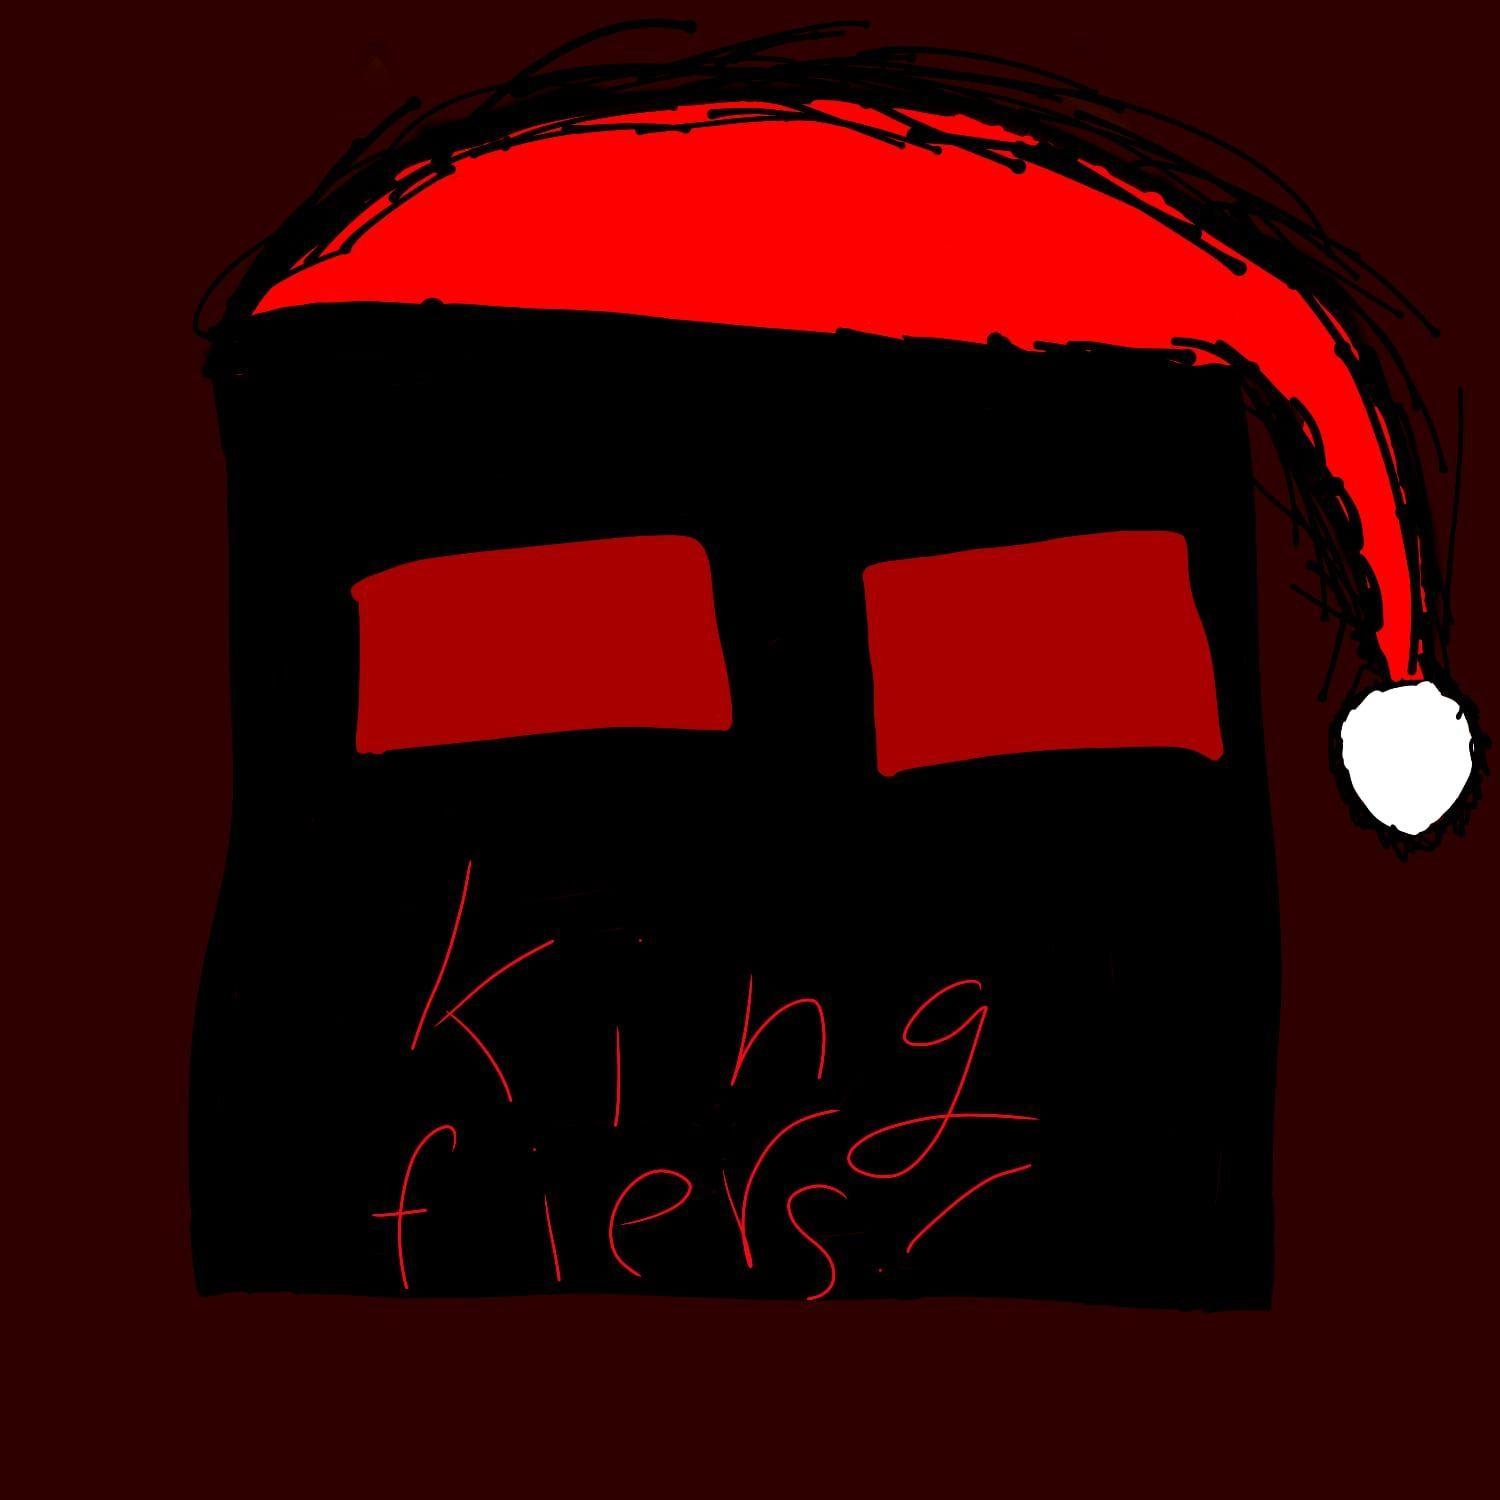 Player King_fiers_ avatar